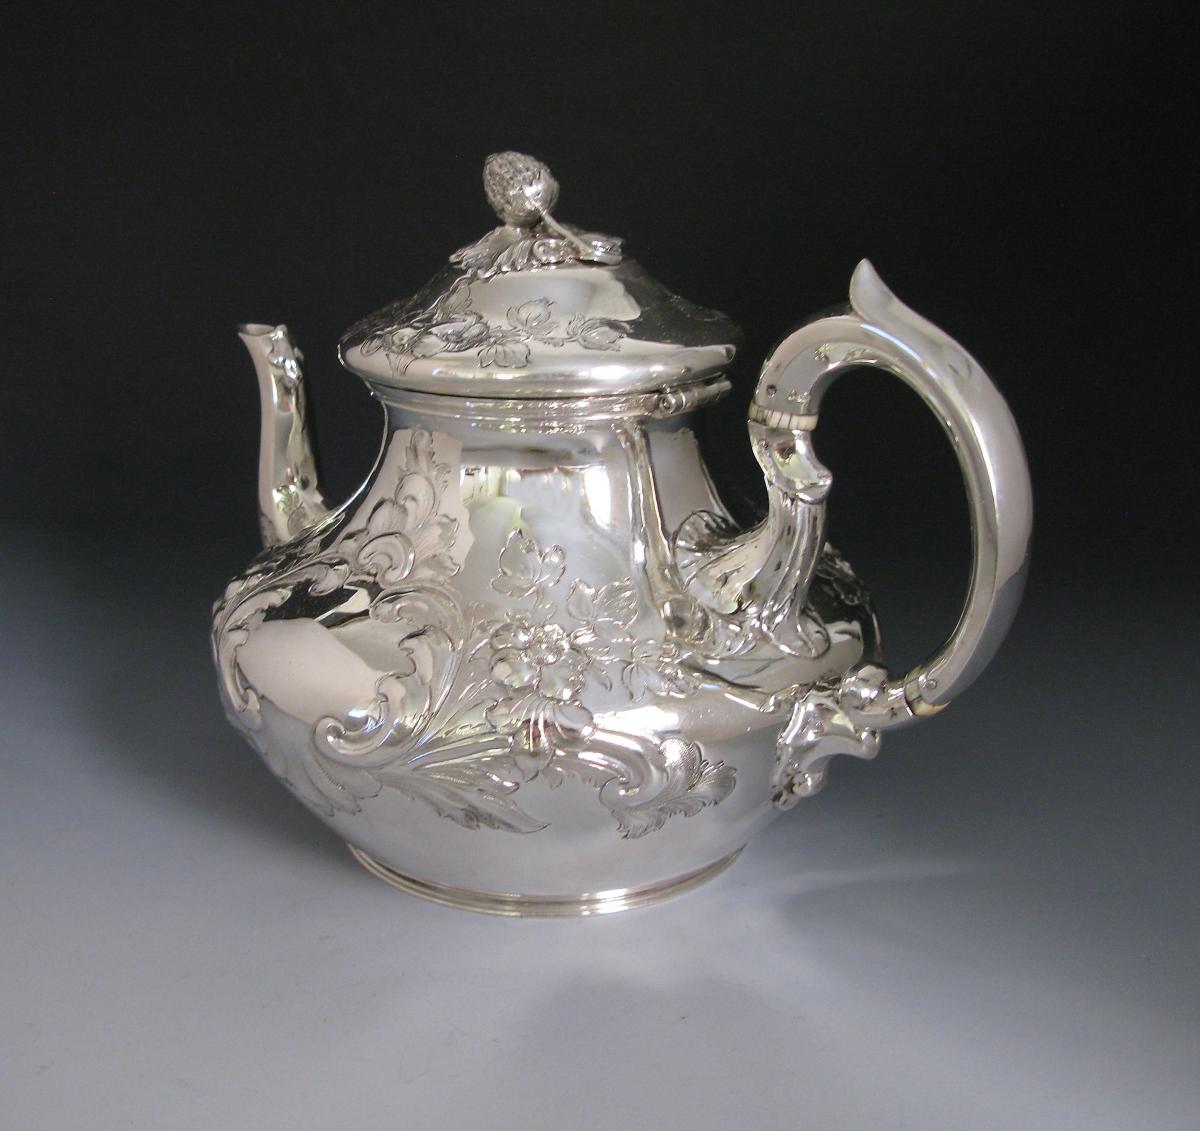 Antique Victorian Sterling Silver Teapot made in 1855 by William Smily of London 